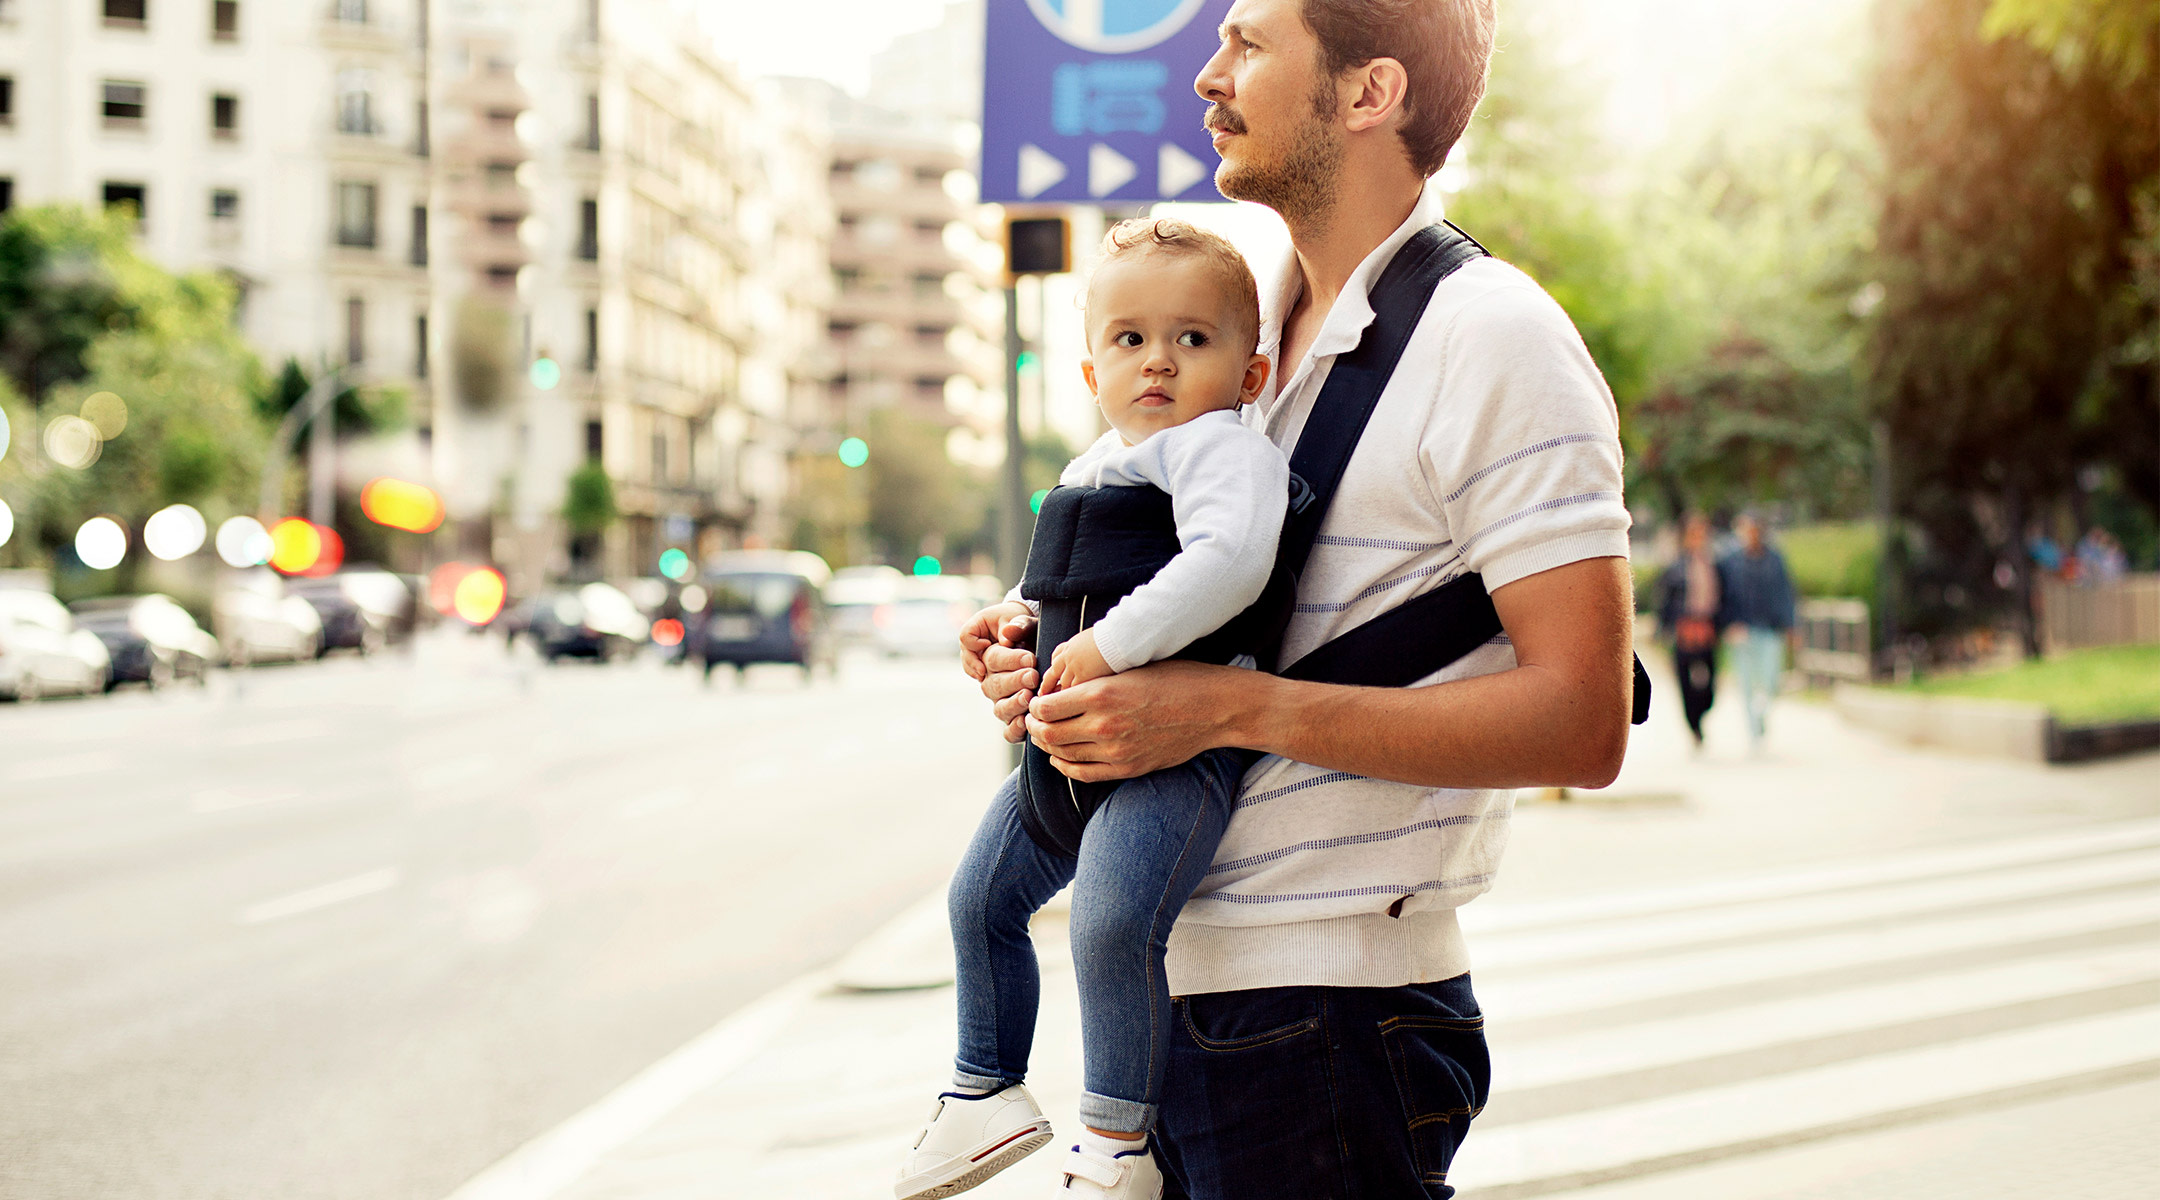 man carrying his baby via baby carrier in public